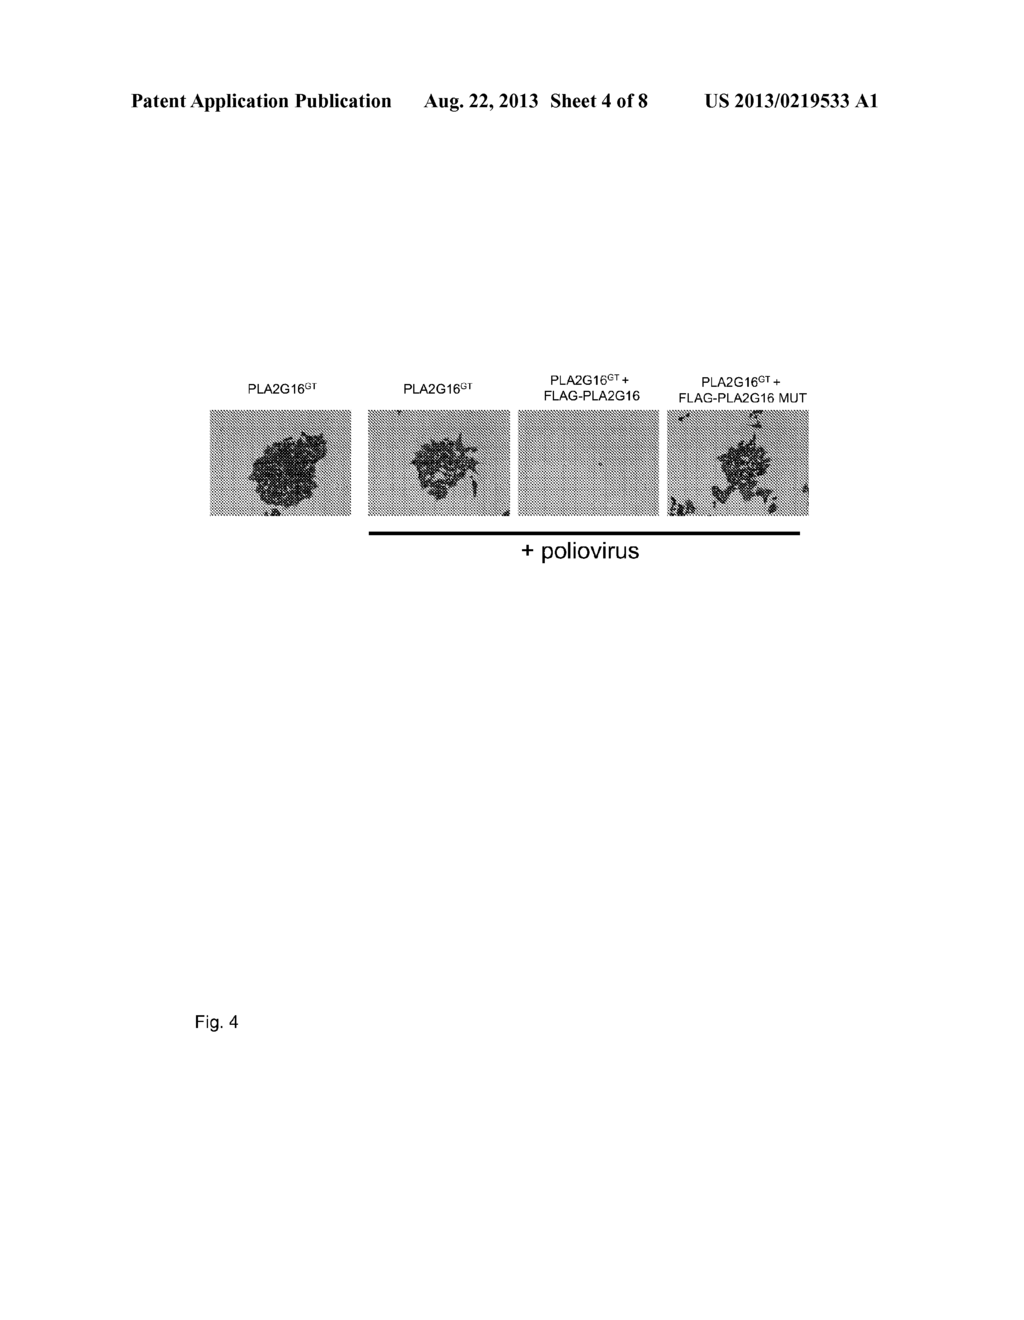 PLA2G16 AS A TARGET FOR ANTIVIRAL COMPOUNDS - diagram, schematic, and image 05